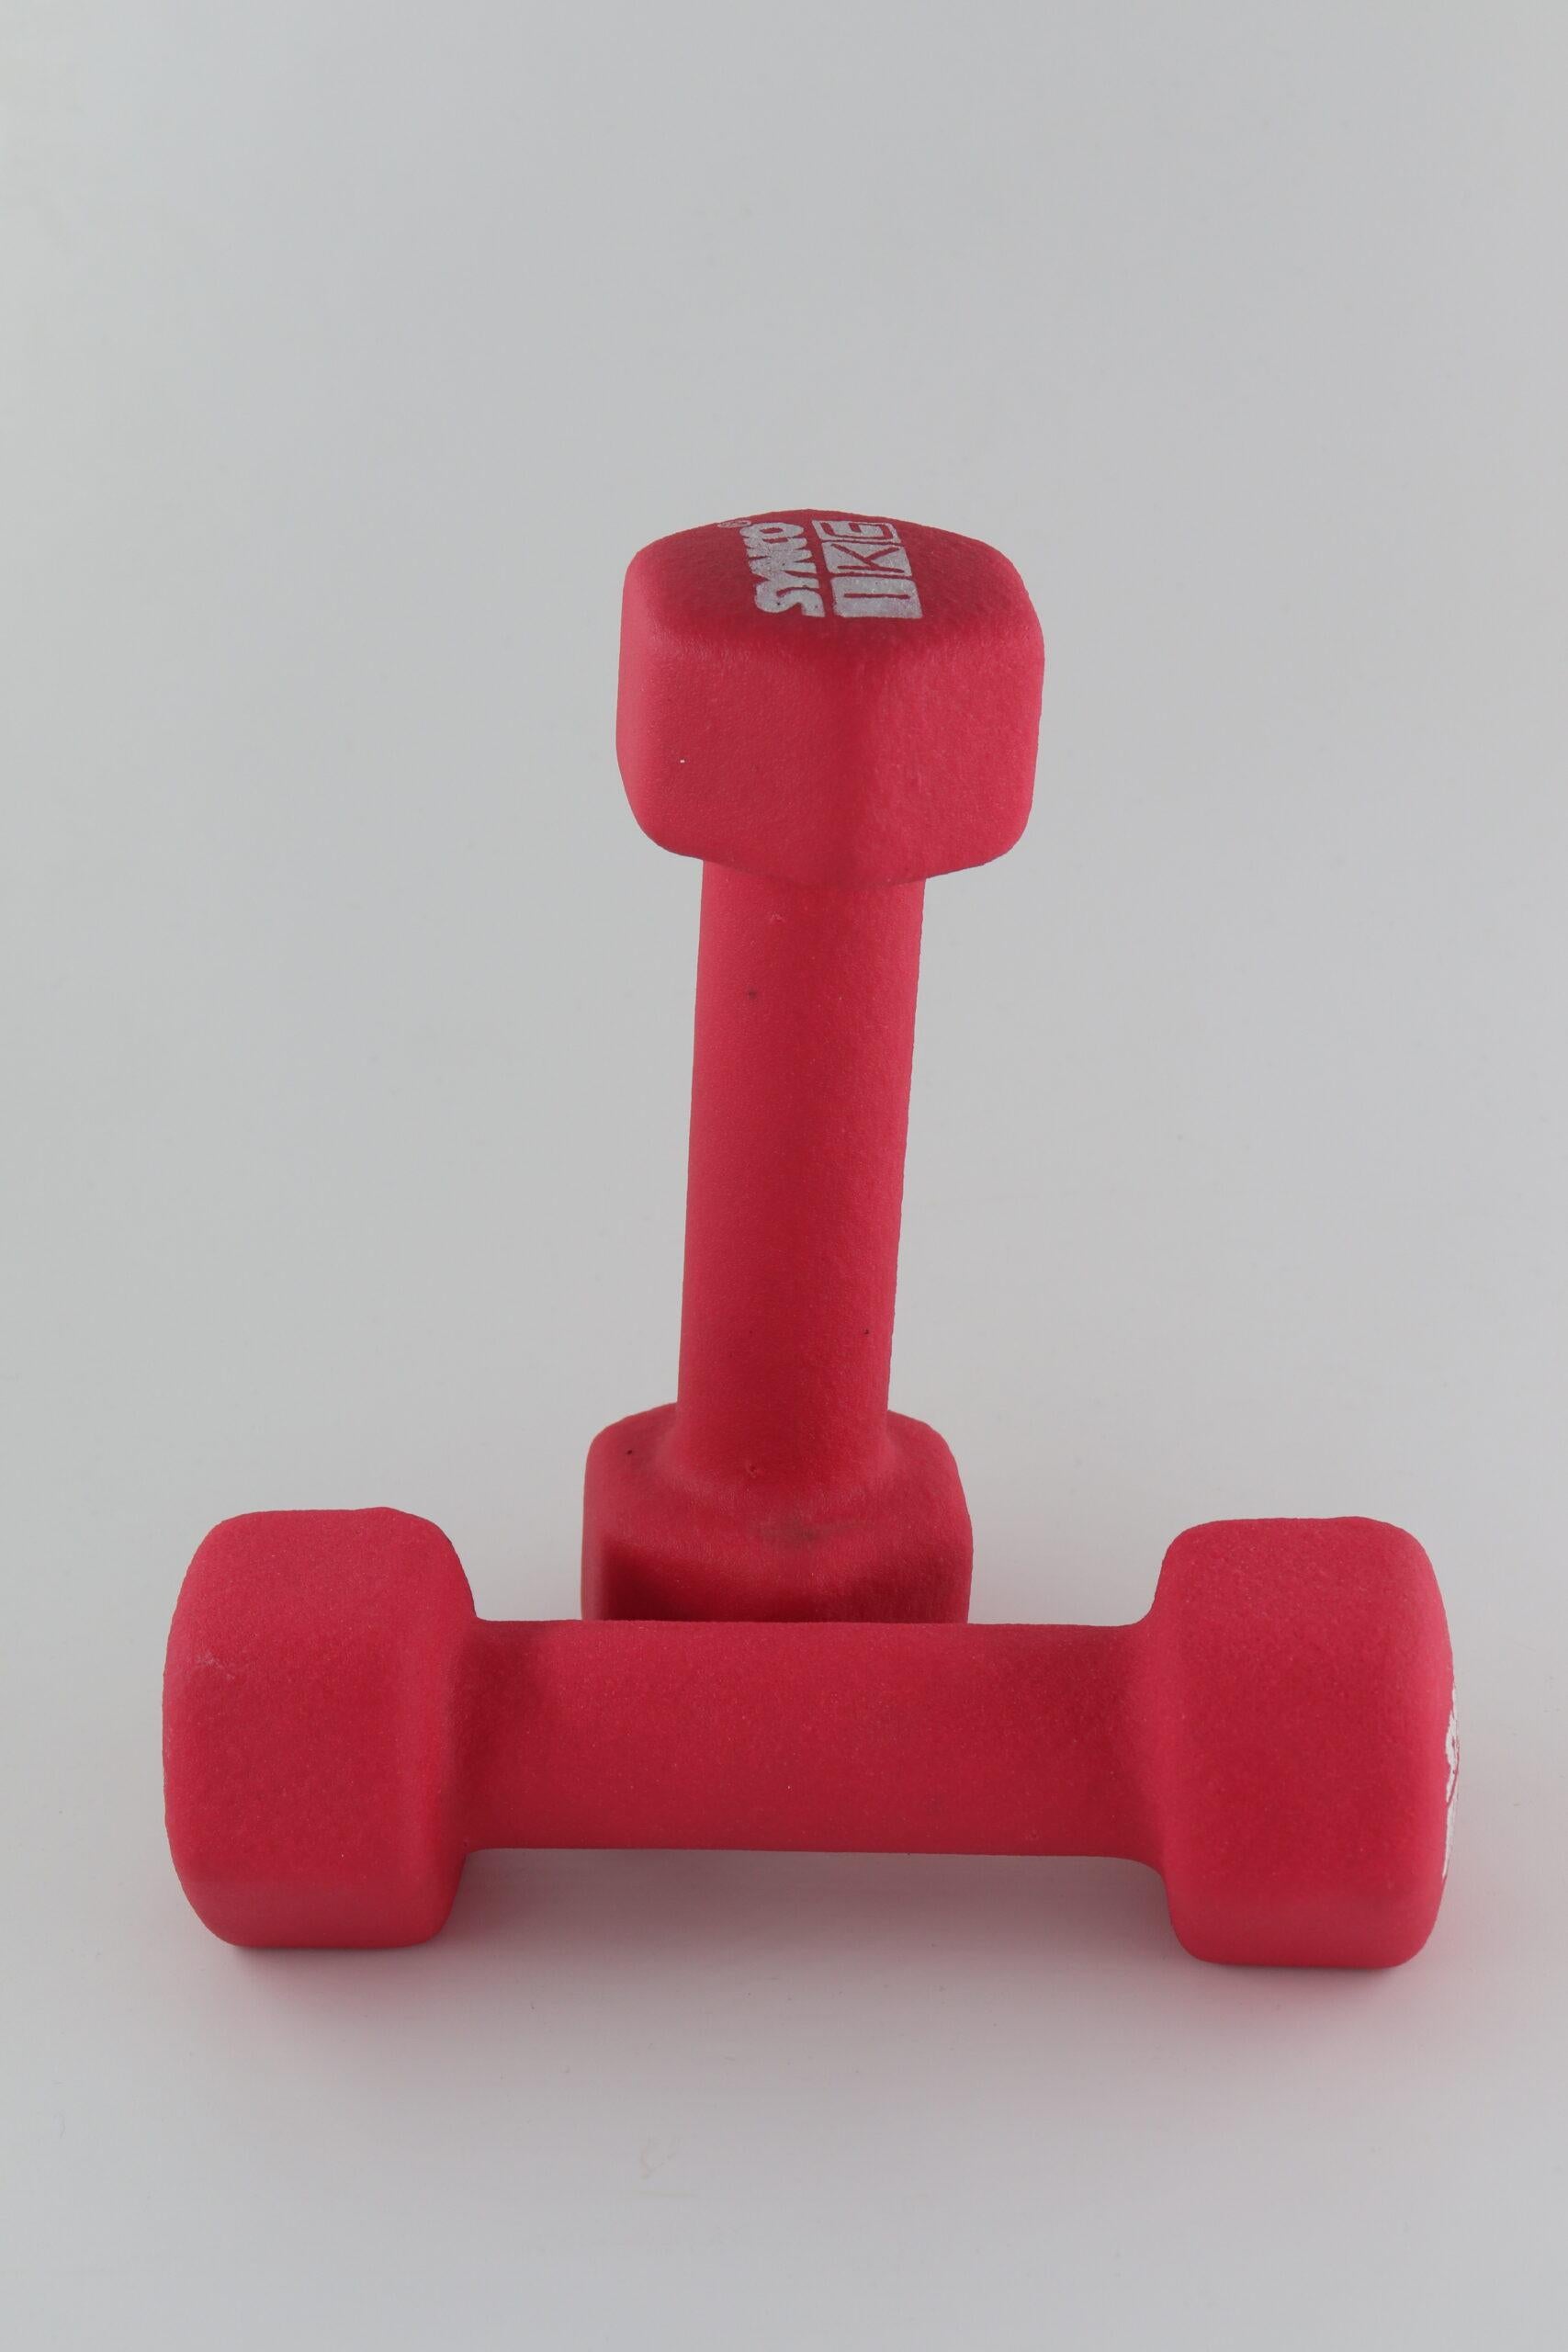 Synco Red Dumbbell Pair ( 2 x 1 KG) - 3